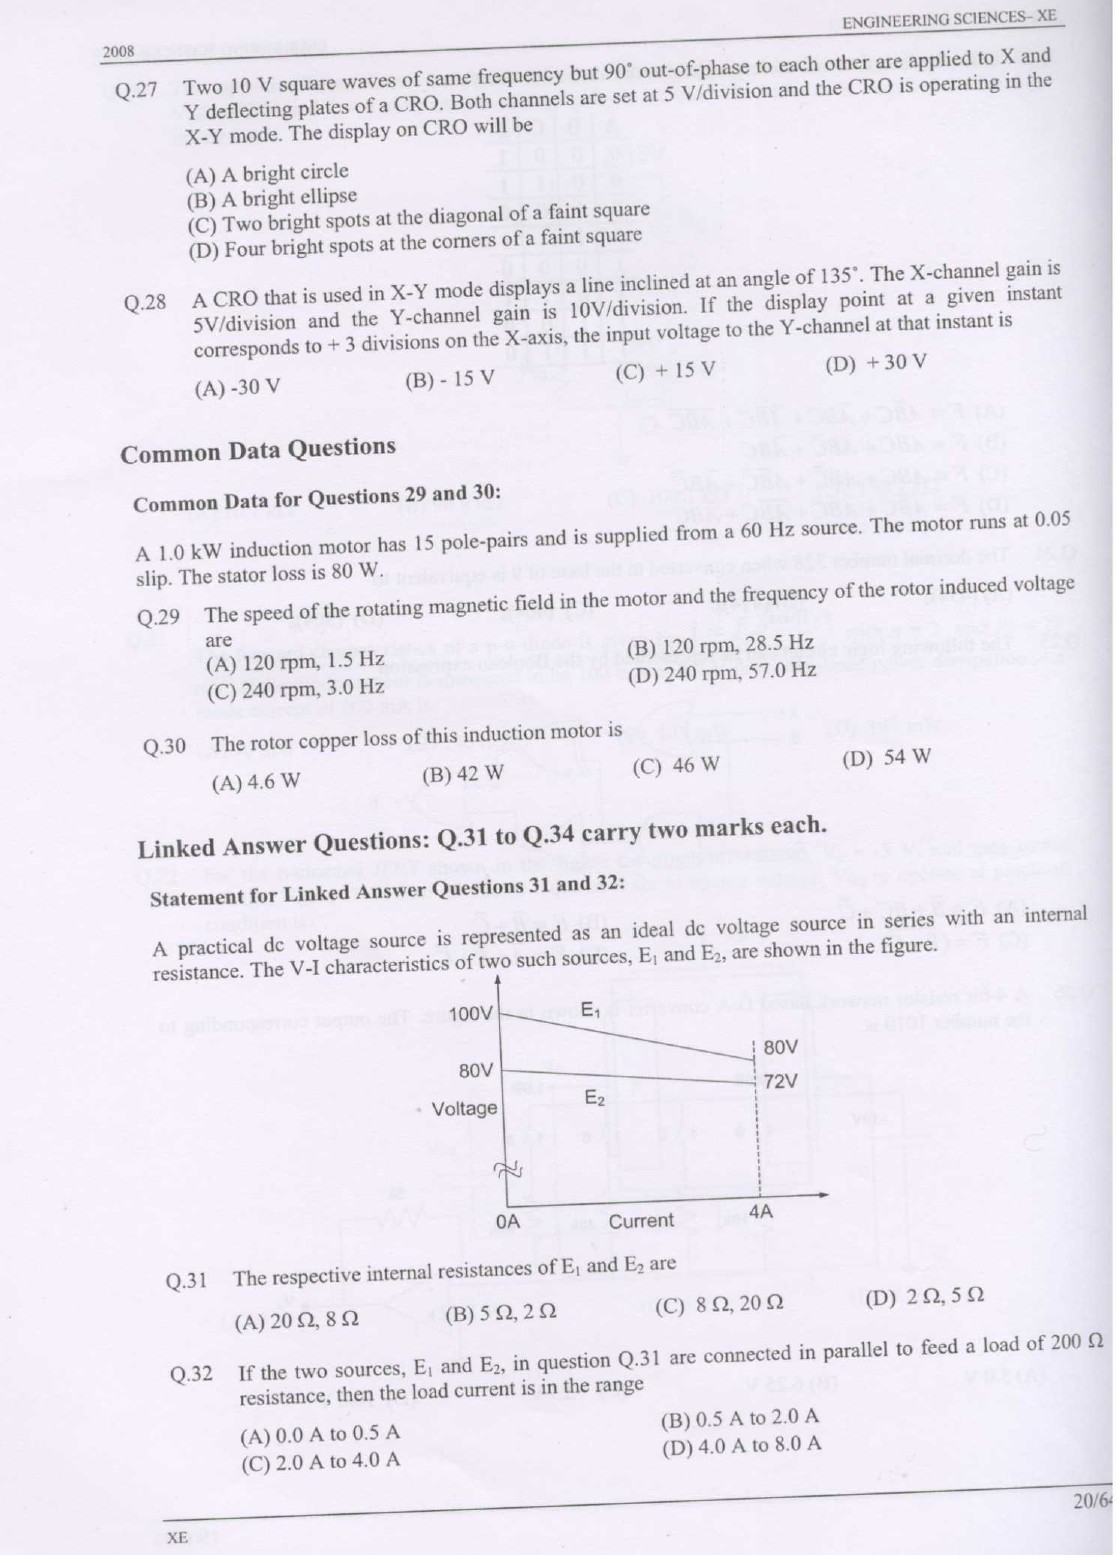 GATE Exam Question Paper 2008 Engineering Sciences 20